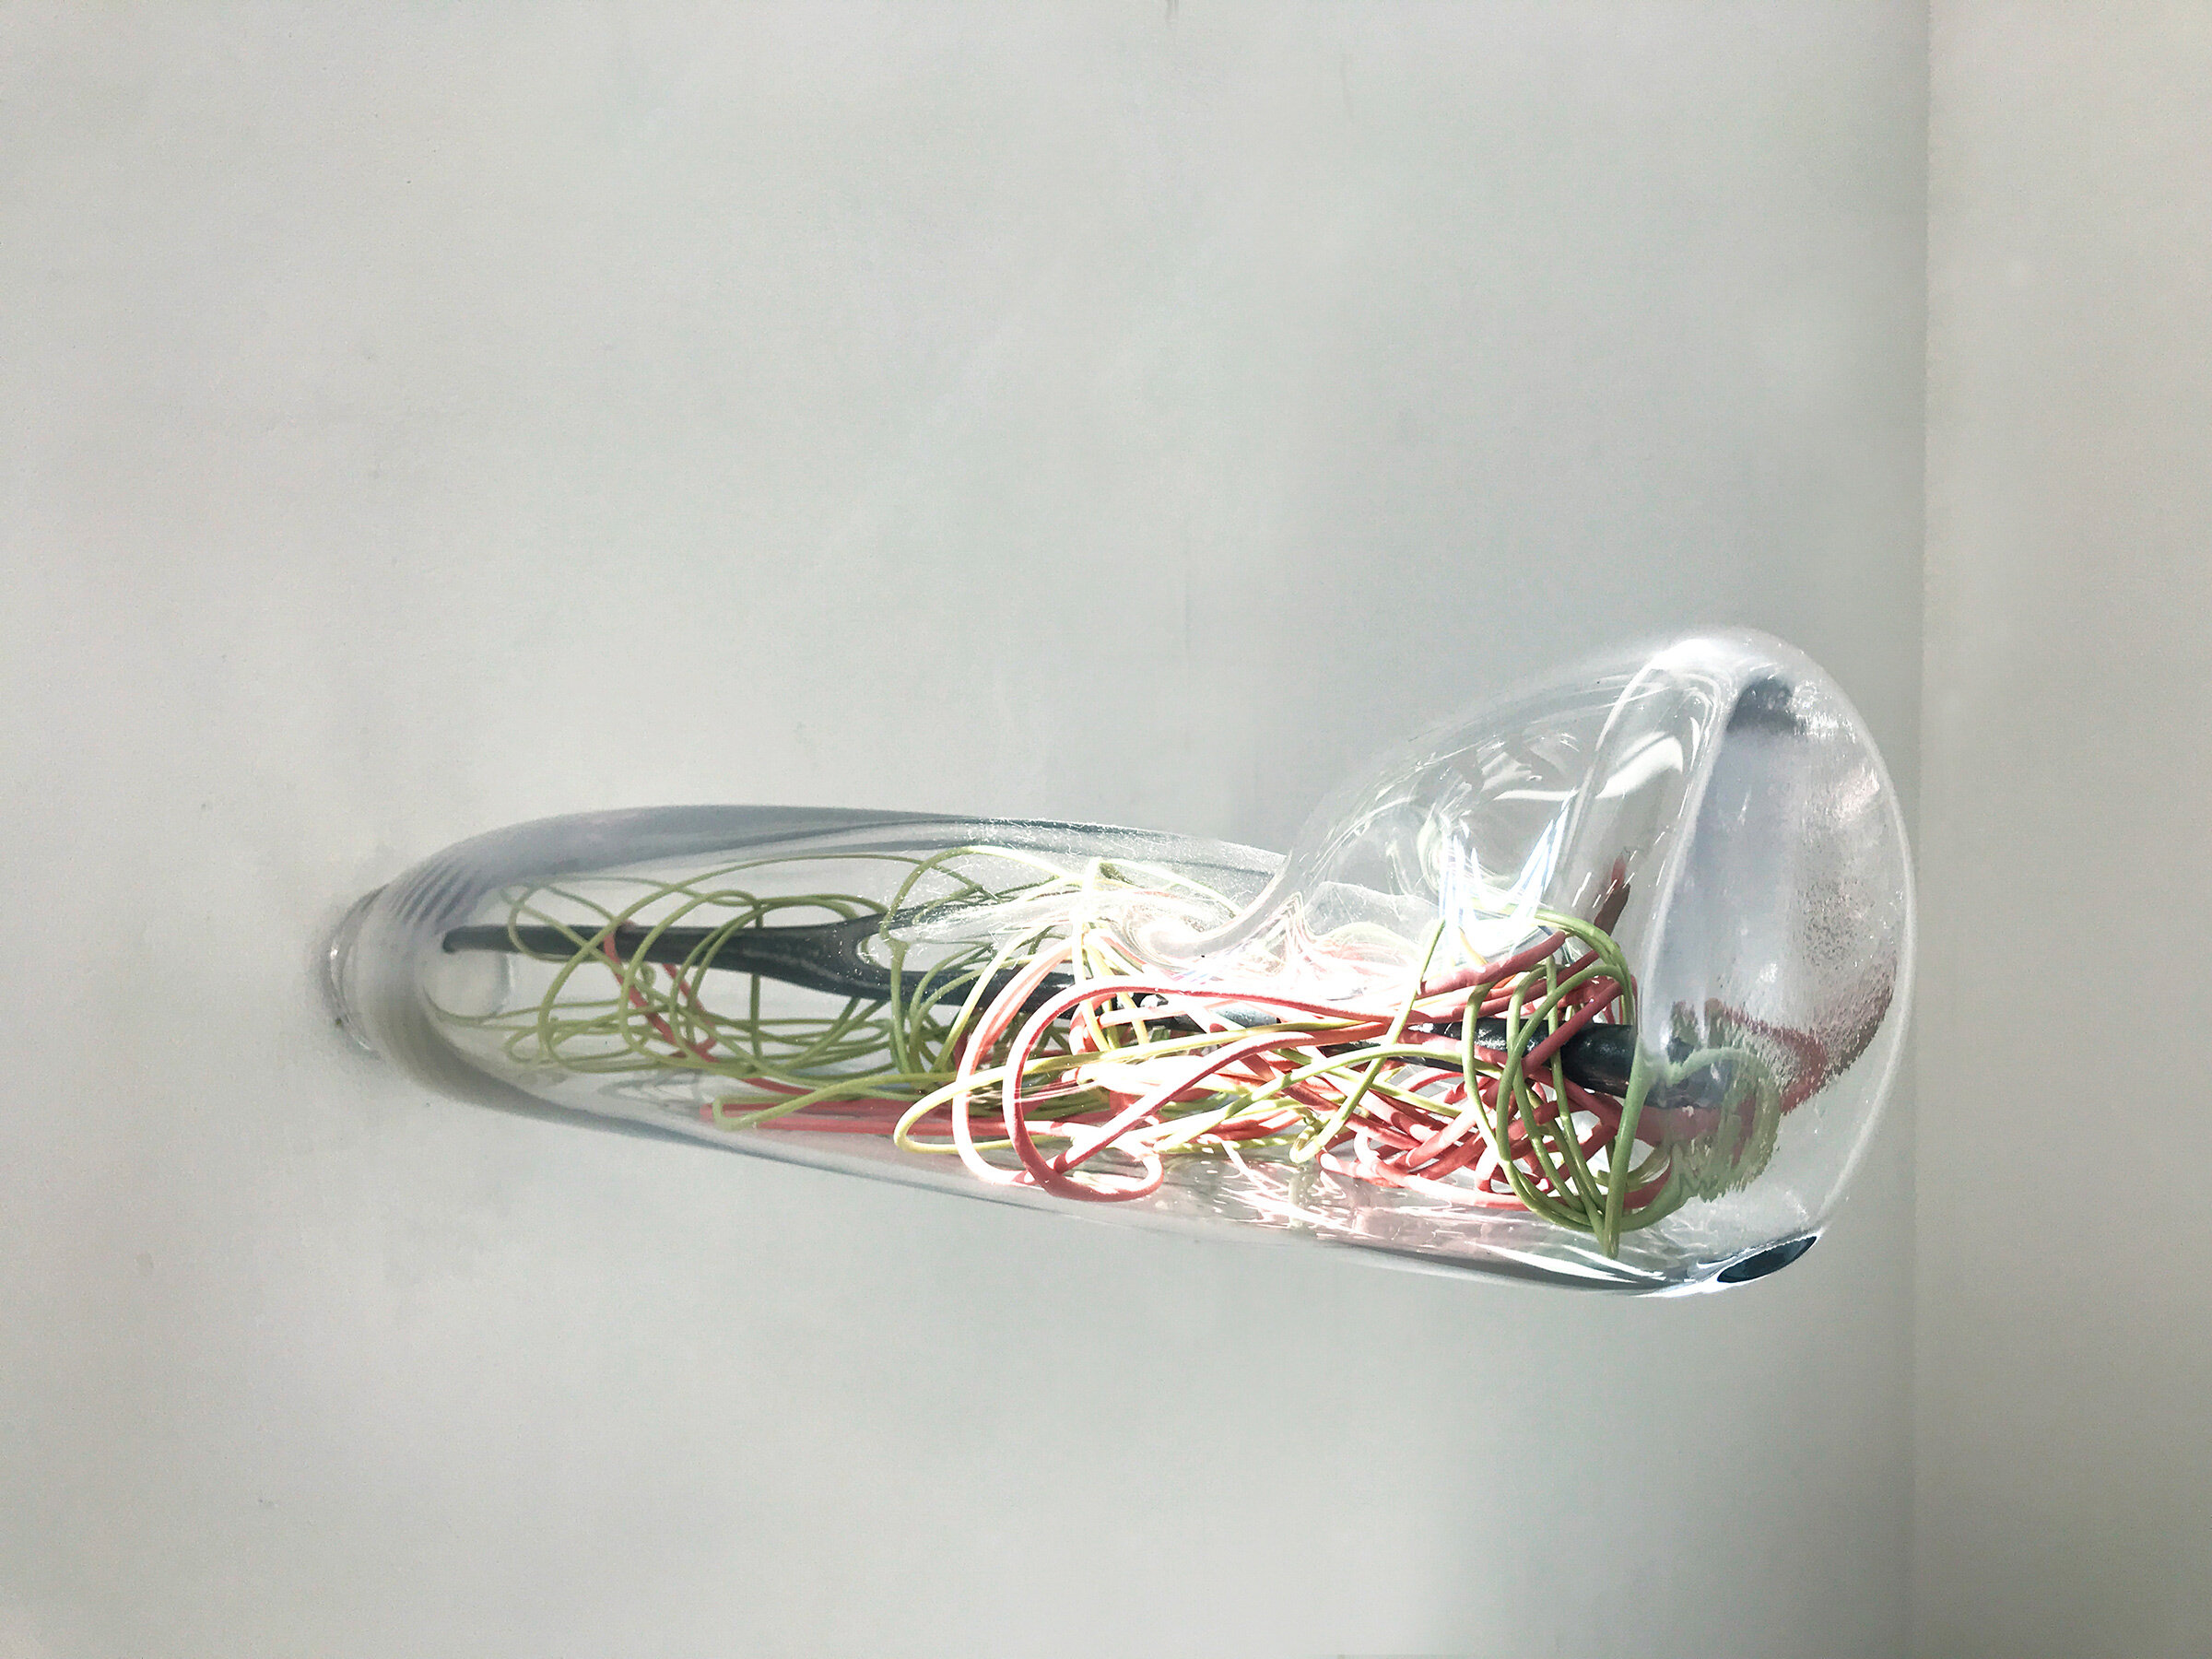  Kelly M O’Brien,  How did they get away with it?  Handblown glass, steel, latex, PVC coated cord. 150 x 130 x 34 cm ©2019 